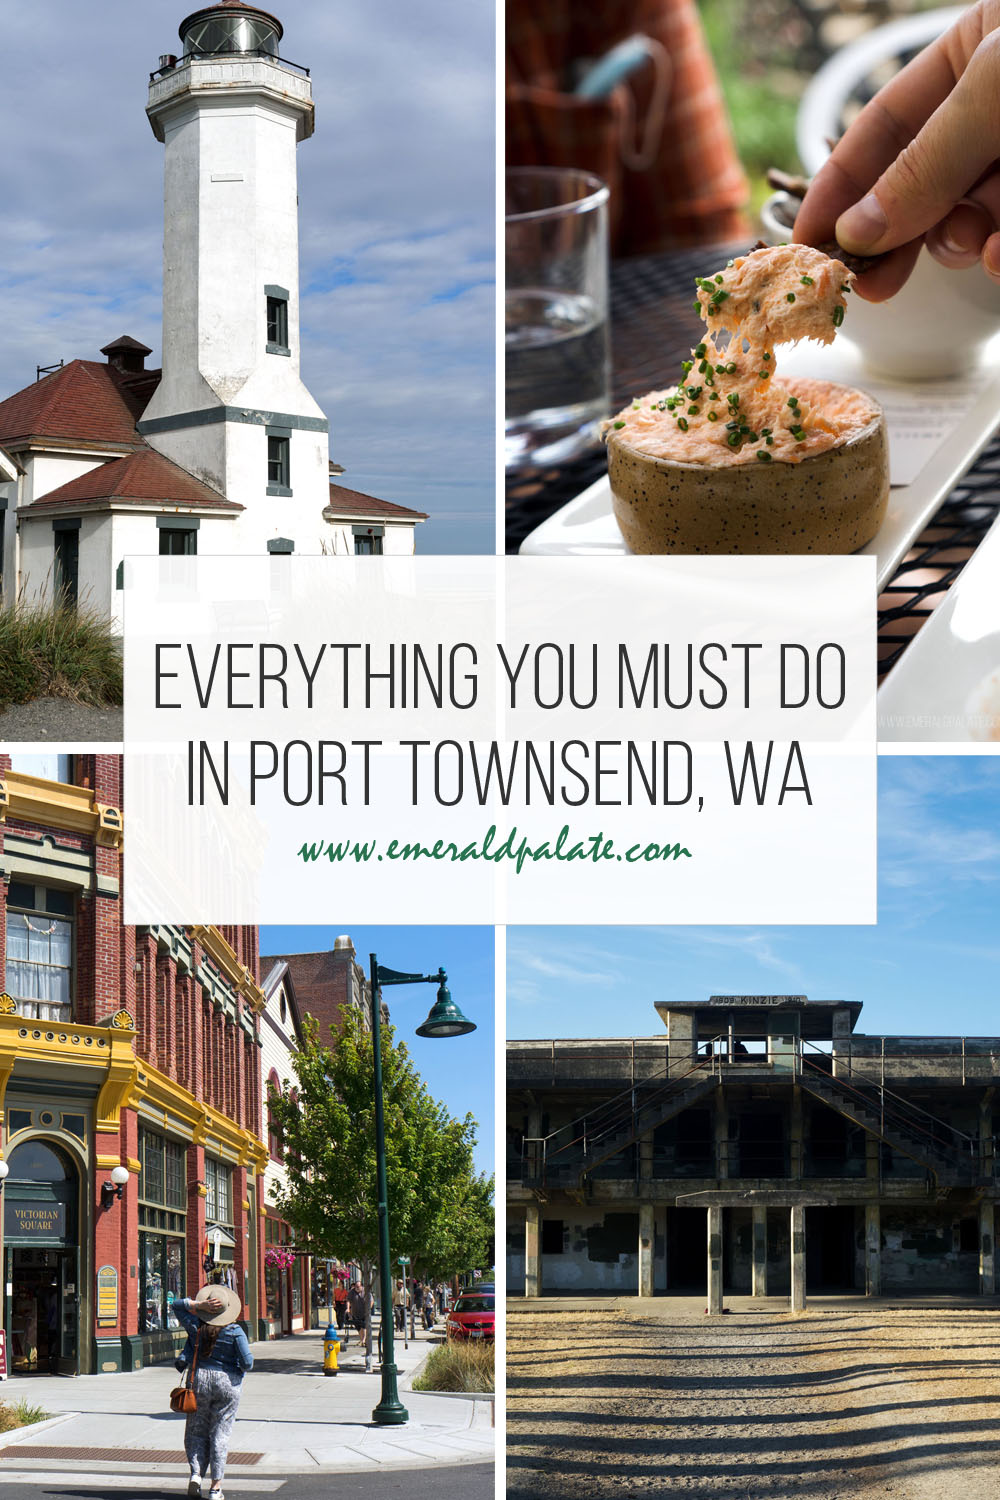 All the best things to do in Port Townsend, Washington. This quaint historic town in Washington on the Olympic Peninsula has everything: restaurants, wineries, breweries, cideries, shopping, state parks, beaches, historic forts...you name it! It makes the perfect Olympic peninsula day trip from Seattle!